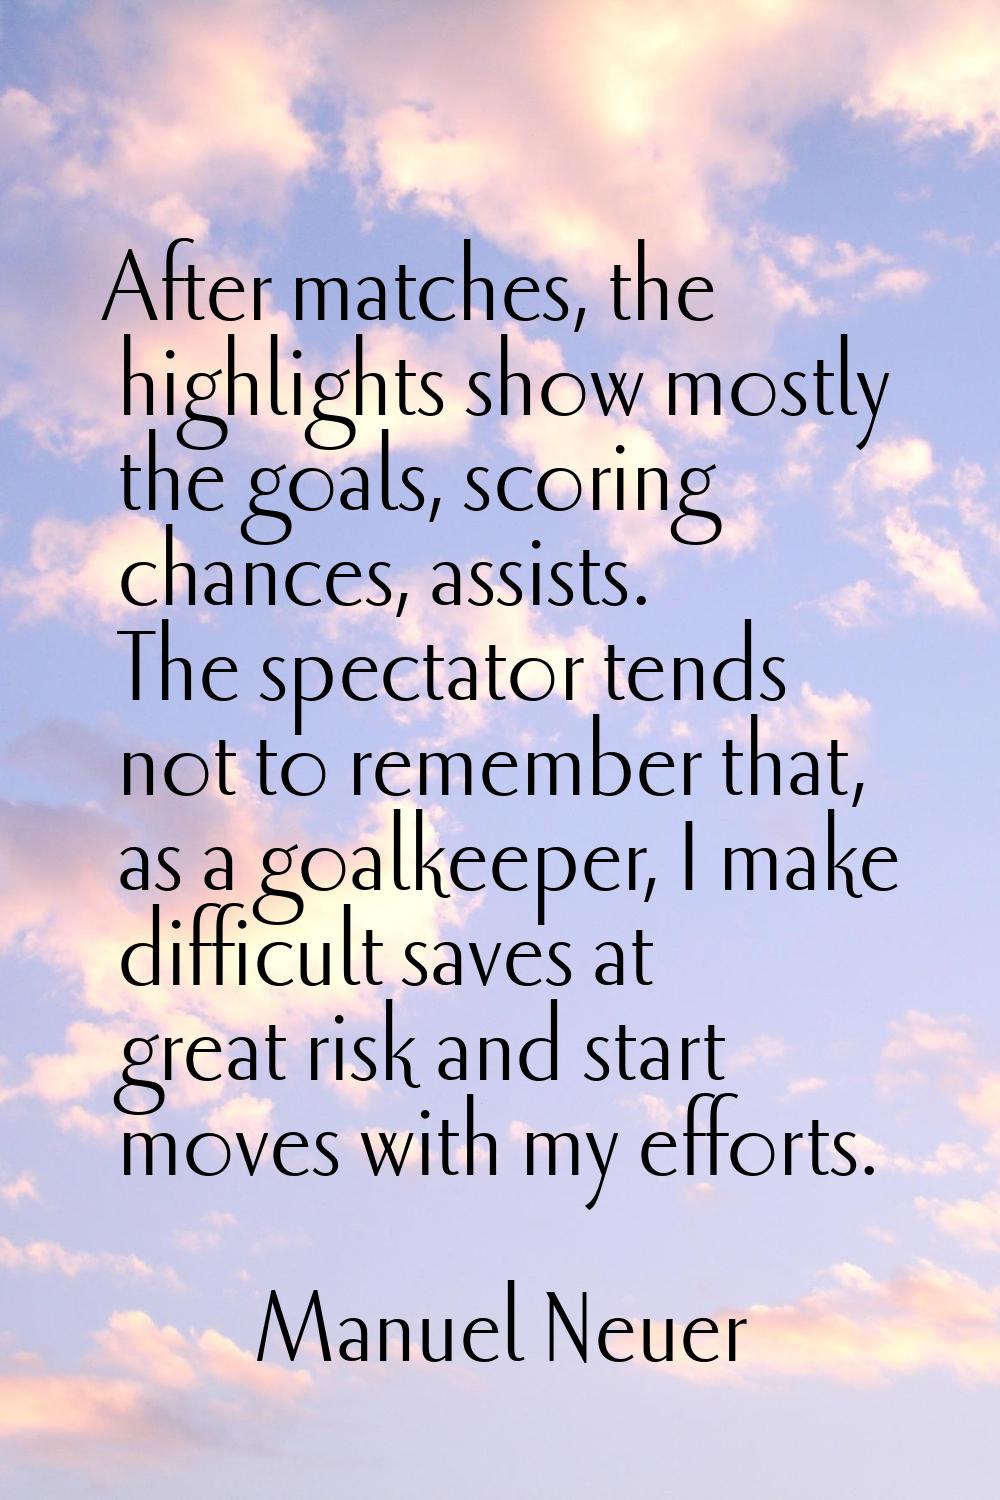 After matches, the highlights show mostly the goals, scoring chances, assists. The spectator tends 